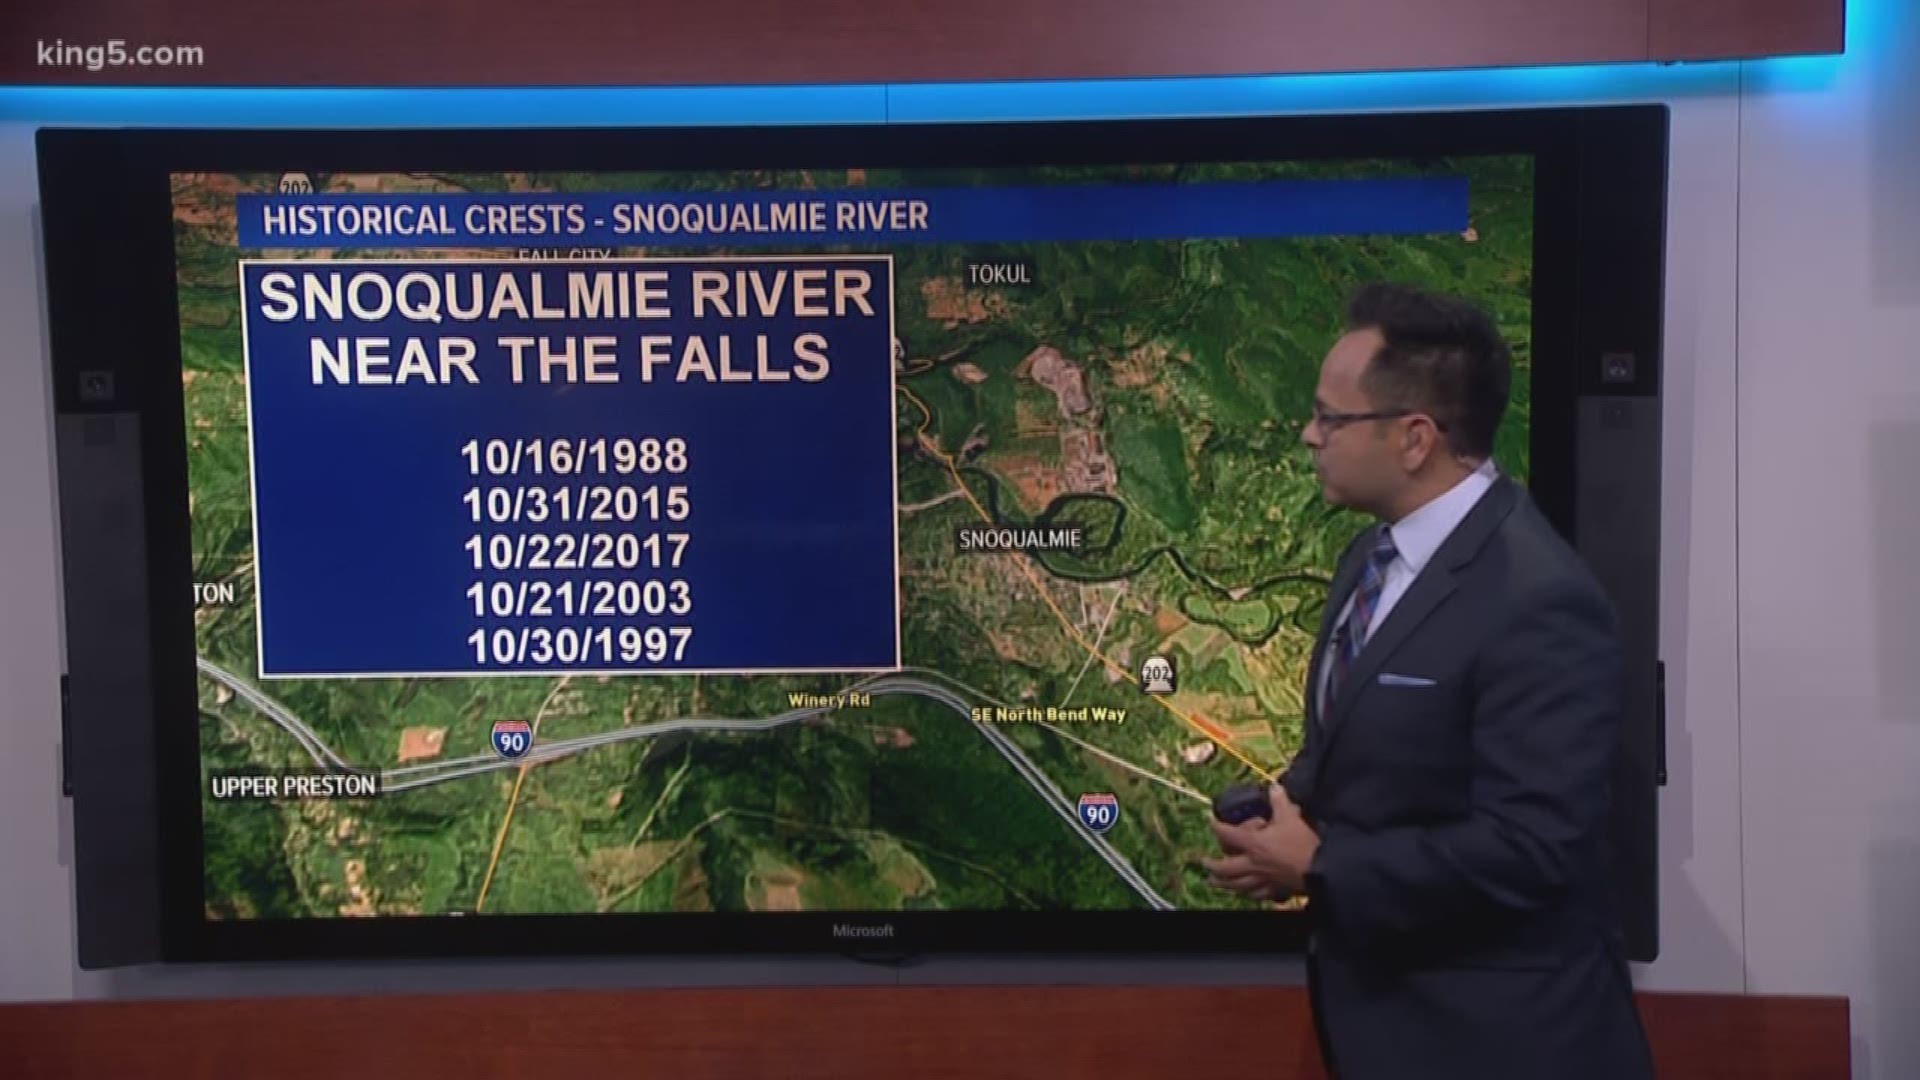 Parts of Western Washington were hit with major flooding on Oct. 22, 2019. This isn't the first time that areas have seen major flooding in the area in October.